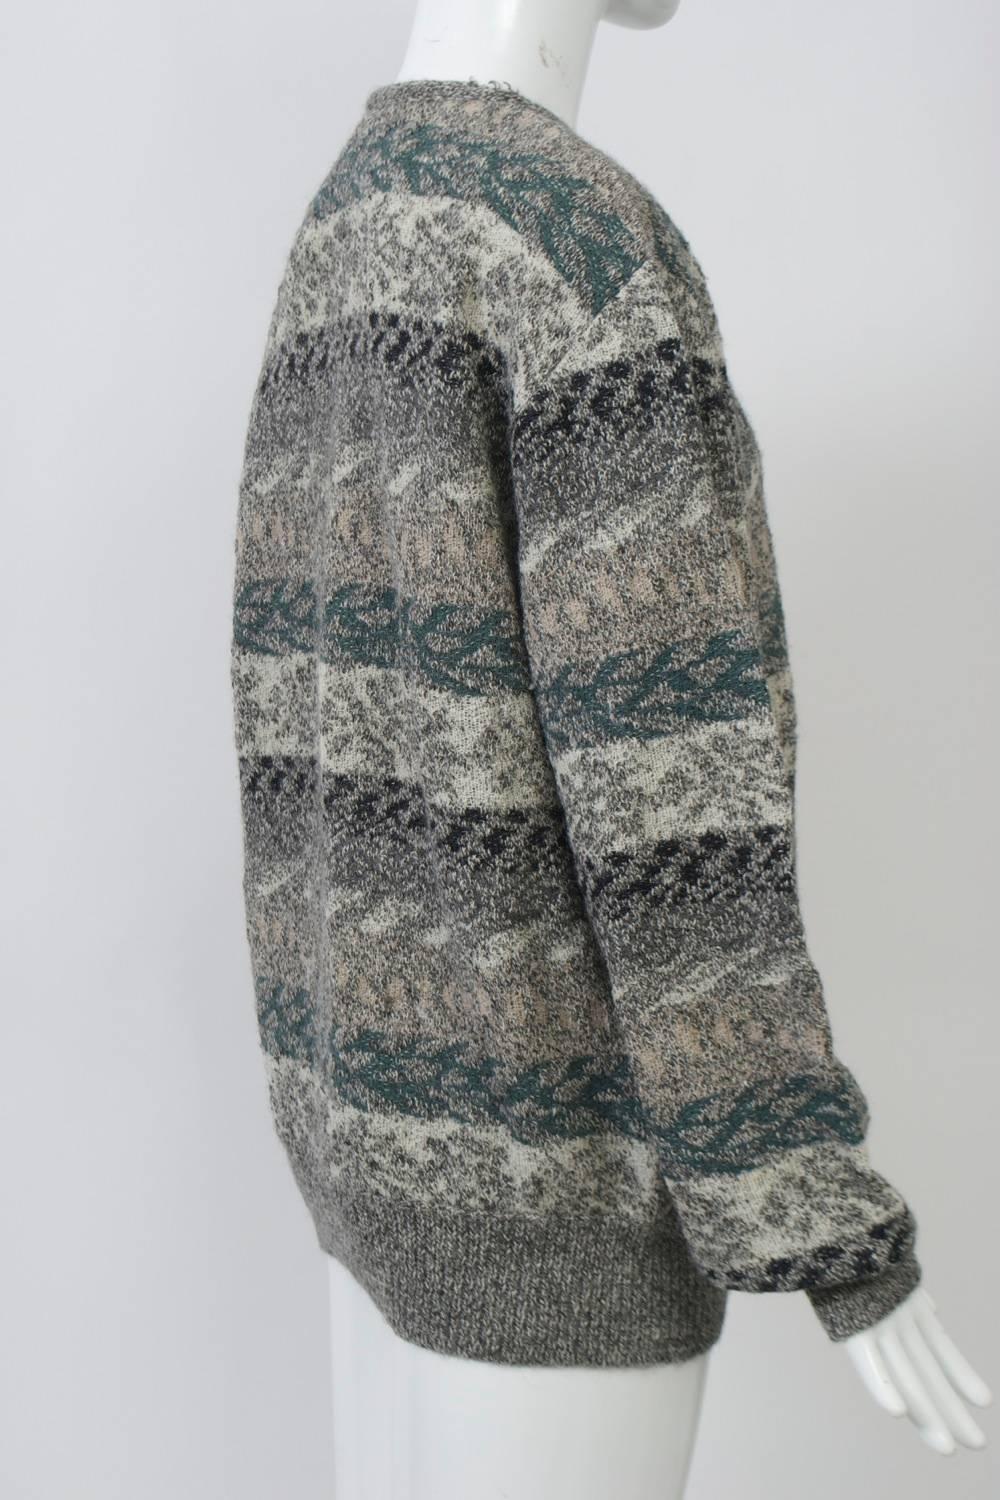 Classic Missoni men's pullover featuring a complicated intarsia design in subtle colors of mostly beiges and grays highlighted by teal. Fabric is a soft blend of alpaca, wool and nylon. 